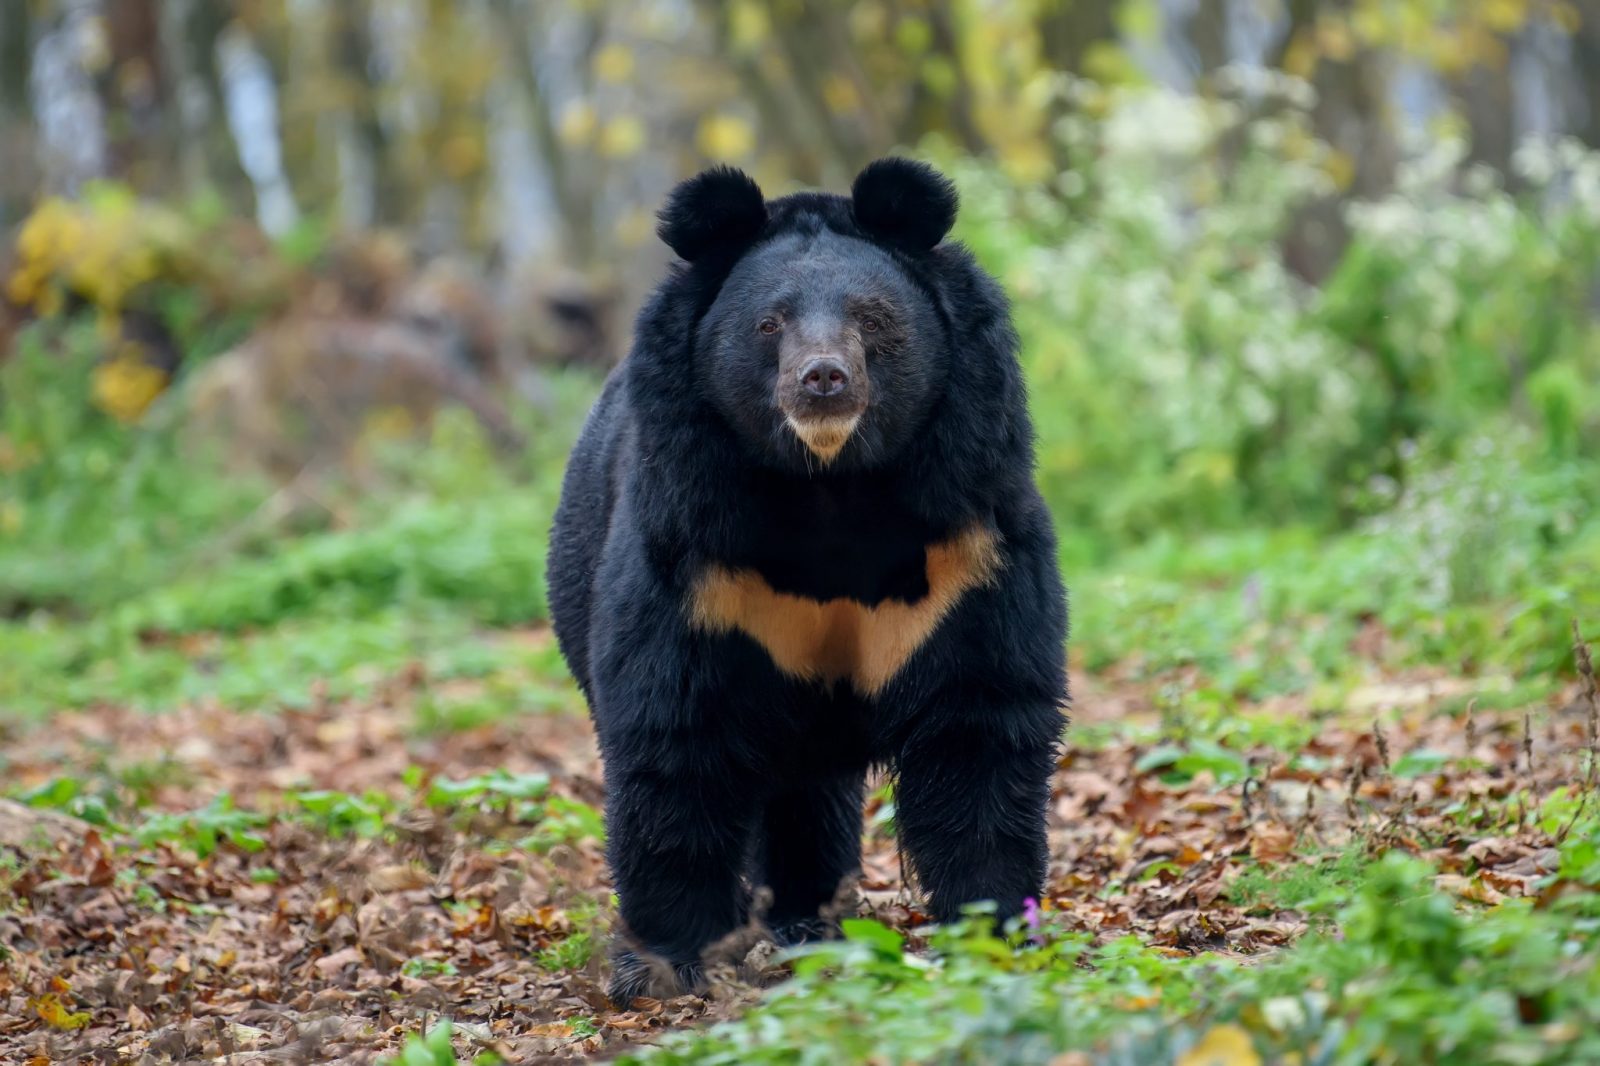 Make Yourself Proud by Getting Over 75% On This Unreasonably Difficult Animals Quiz Asiatic black bear